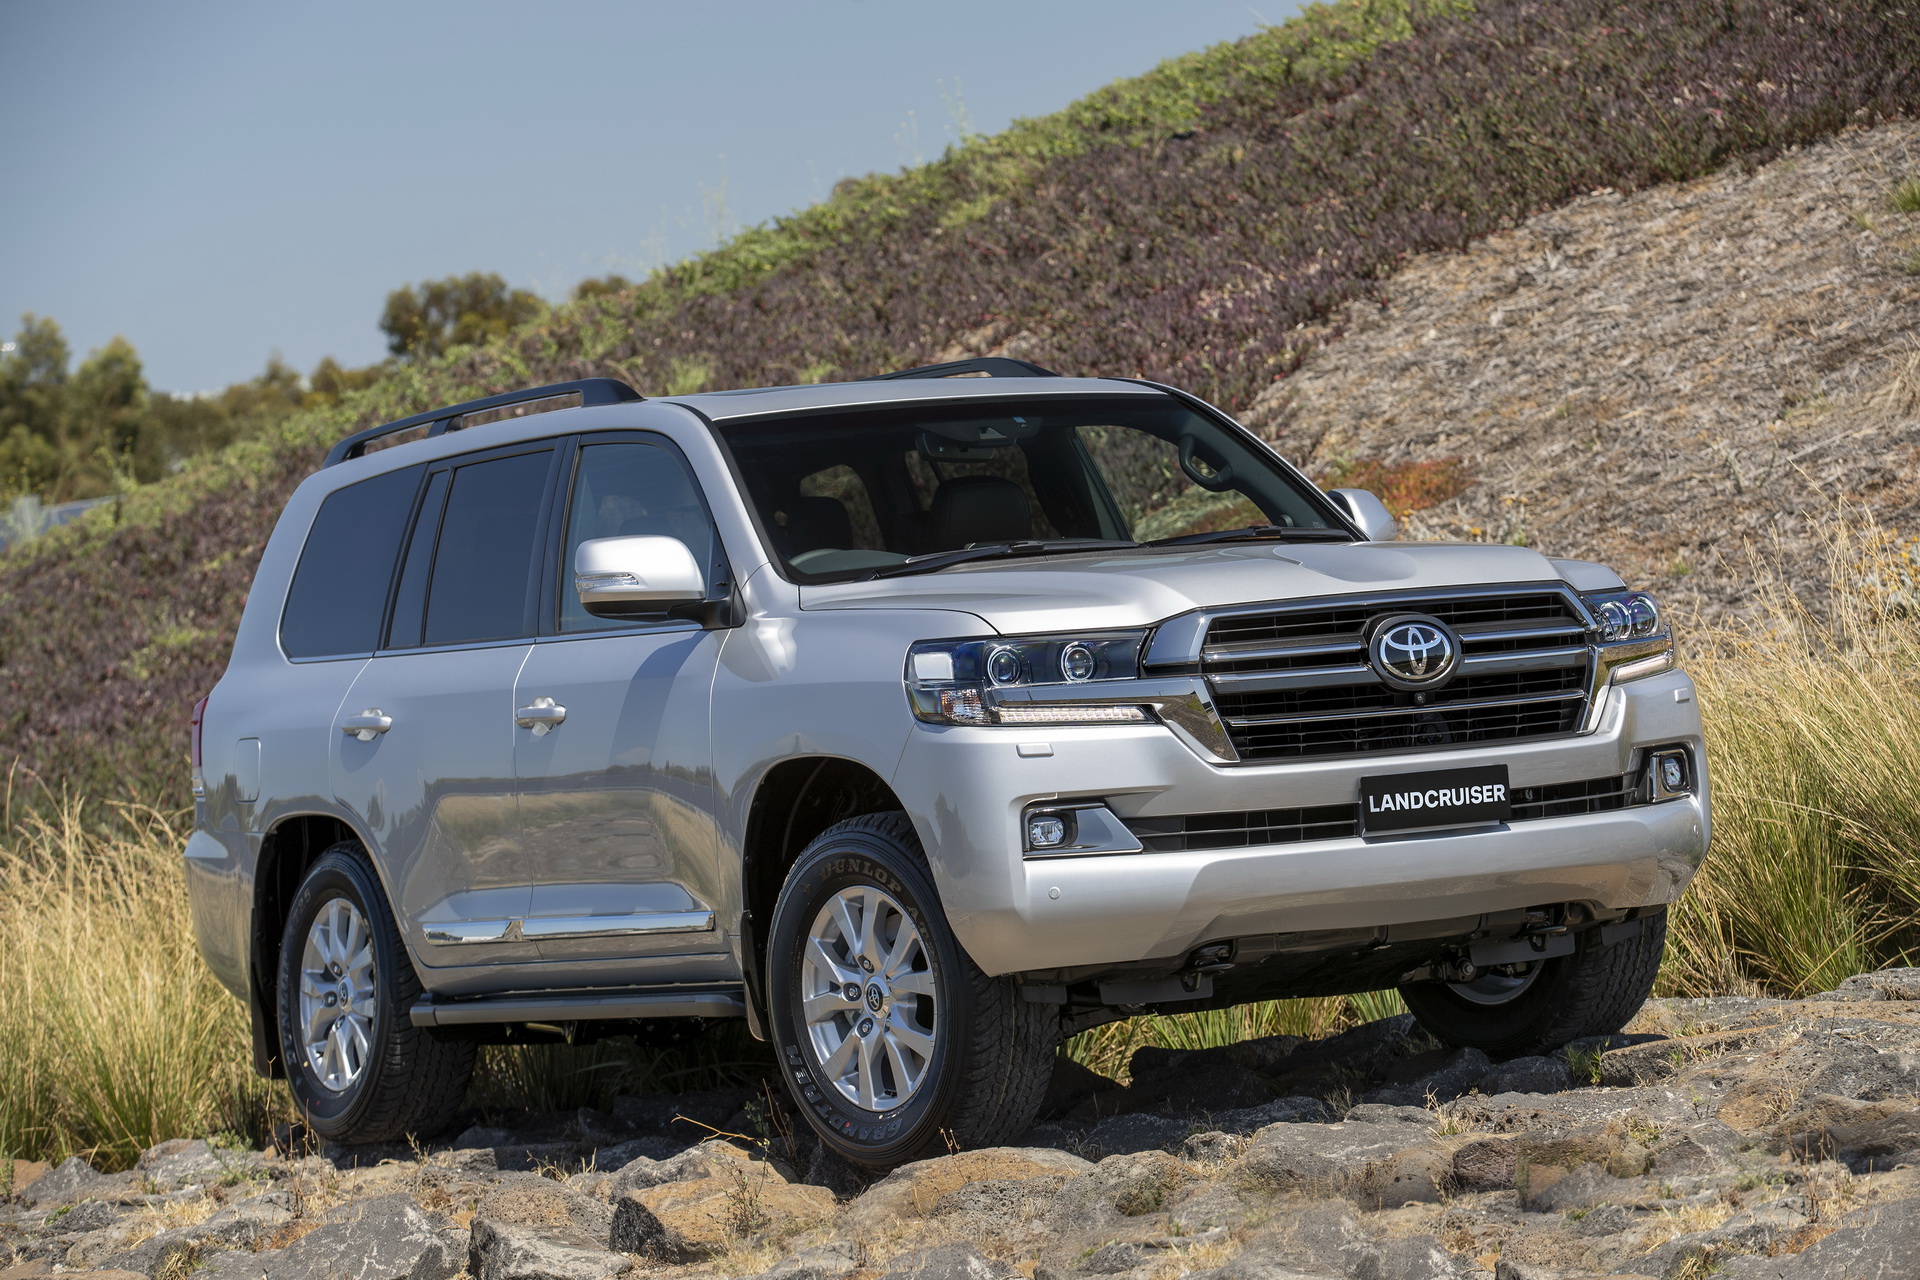 Toyota's Land Cruiser Has Been Around a While. How Did It Get Its Start?